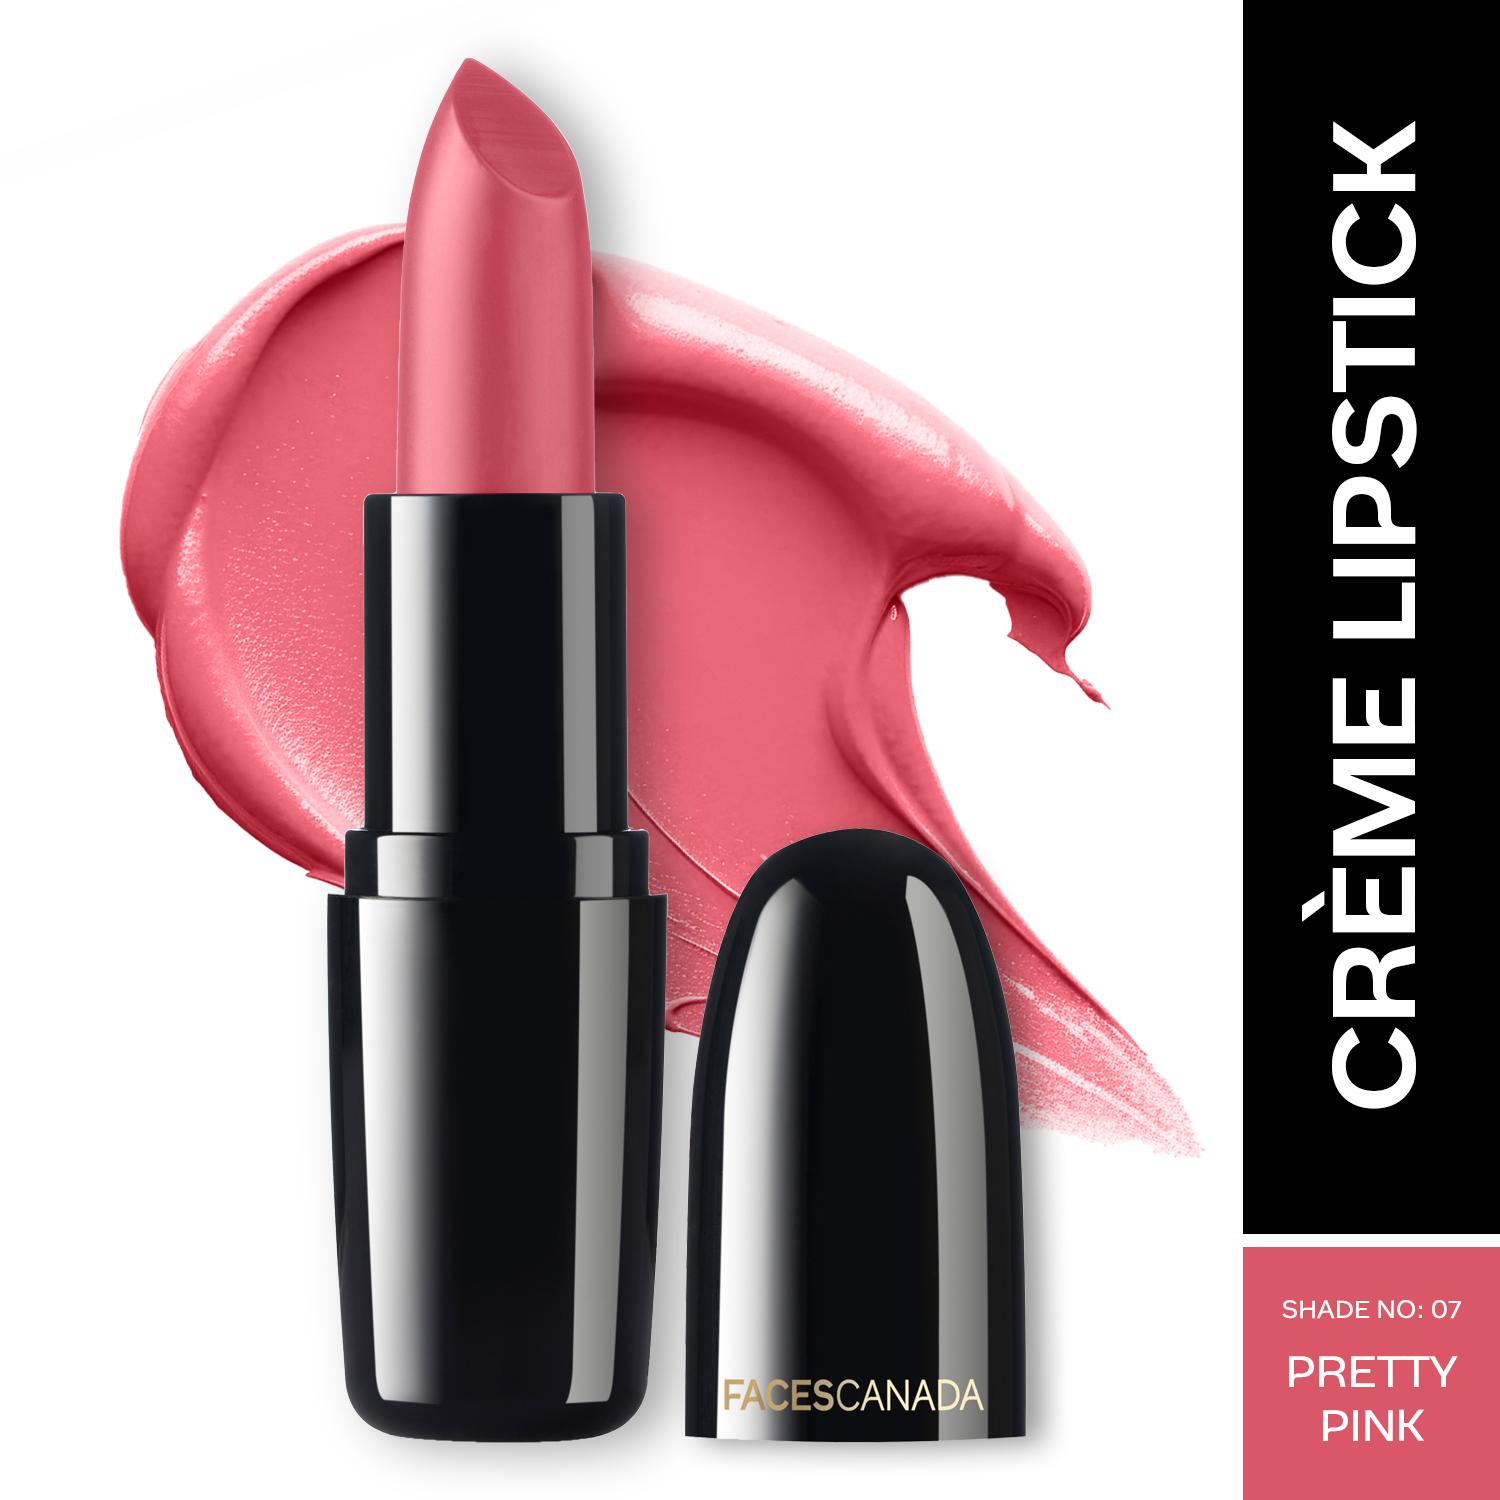 Faces Canada | Faces Canada Weightless Creme Finish Lipstick, Creamy Finish, Hydrated Lips - Pretty Pink 07 (4 g)